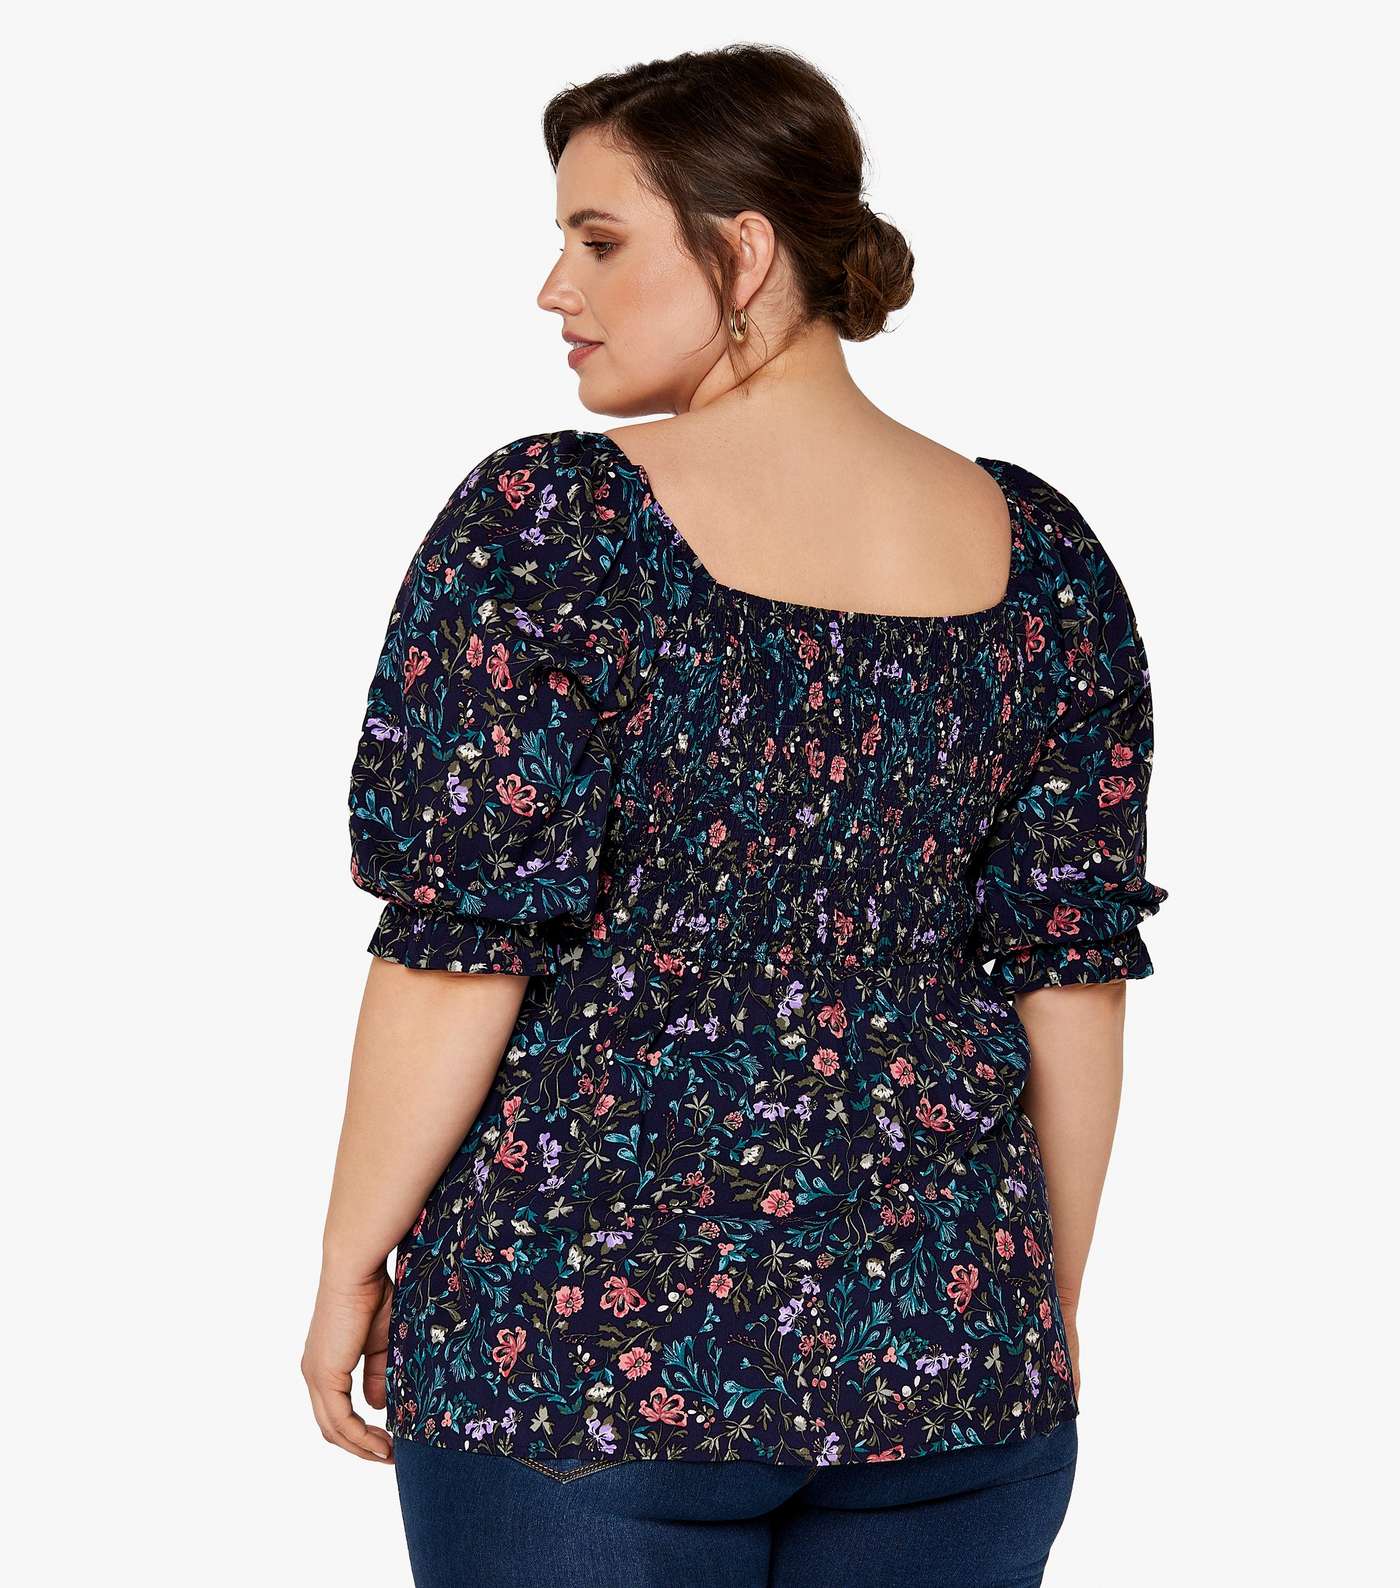 Apricot Curves Navy Floral Peplum Top Image 3